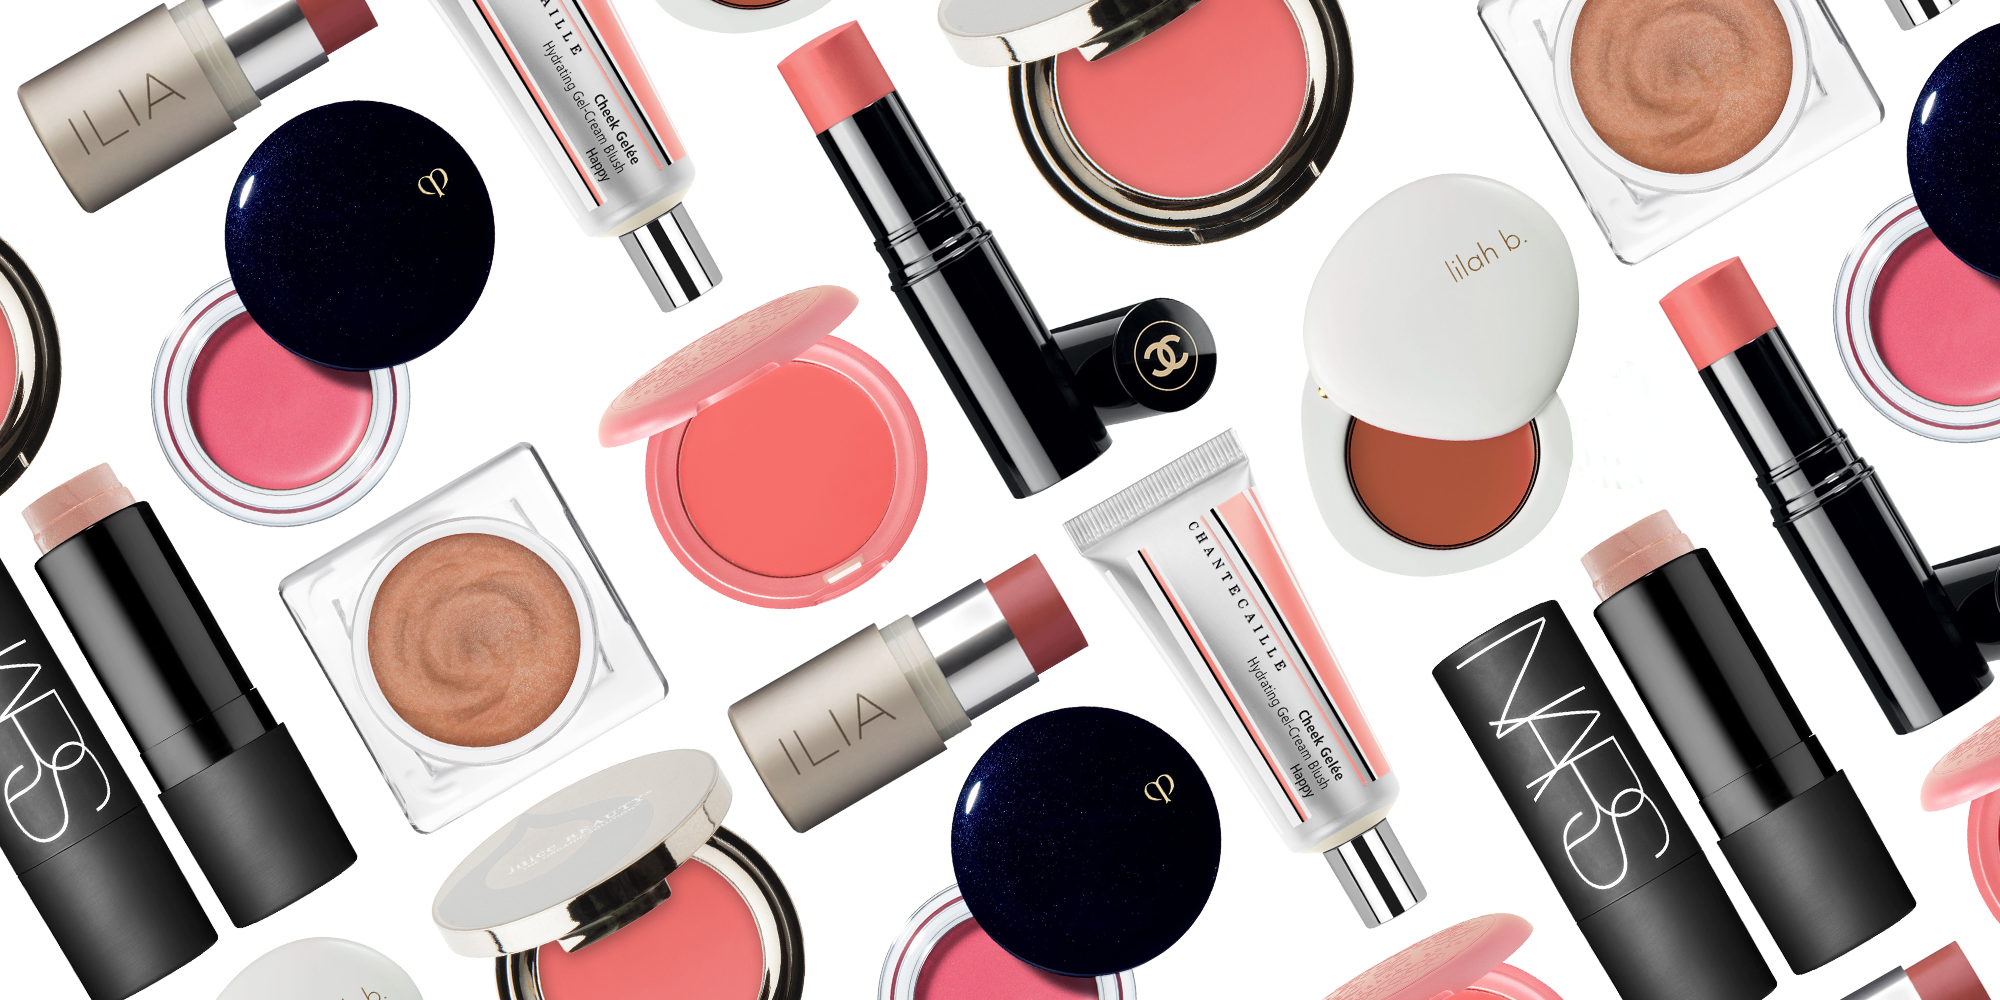 Best Cream Blush 2022 - The Best Cream Blush for a Natural Look